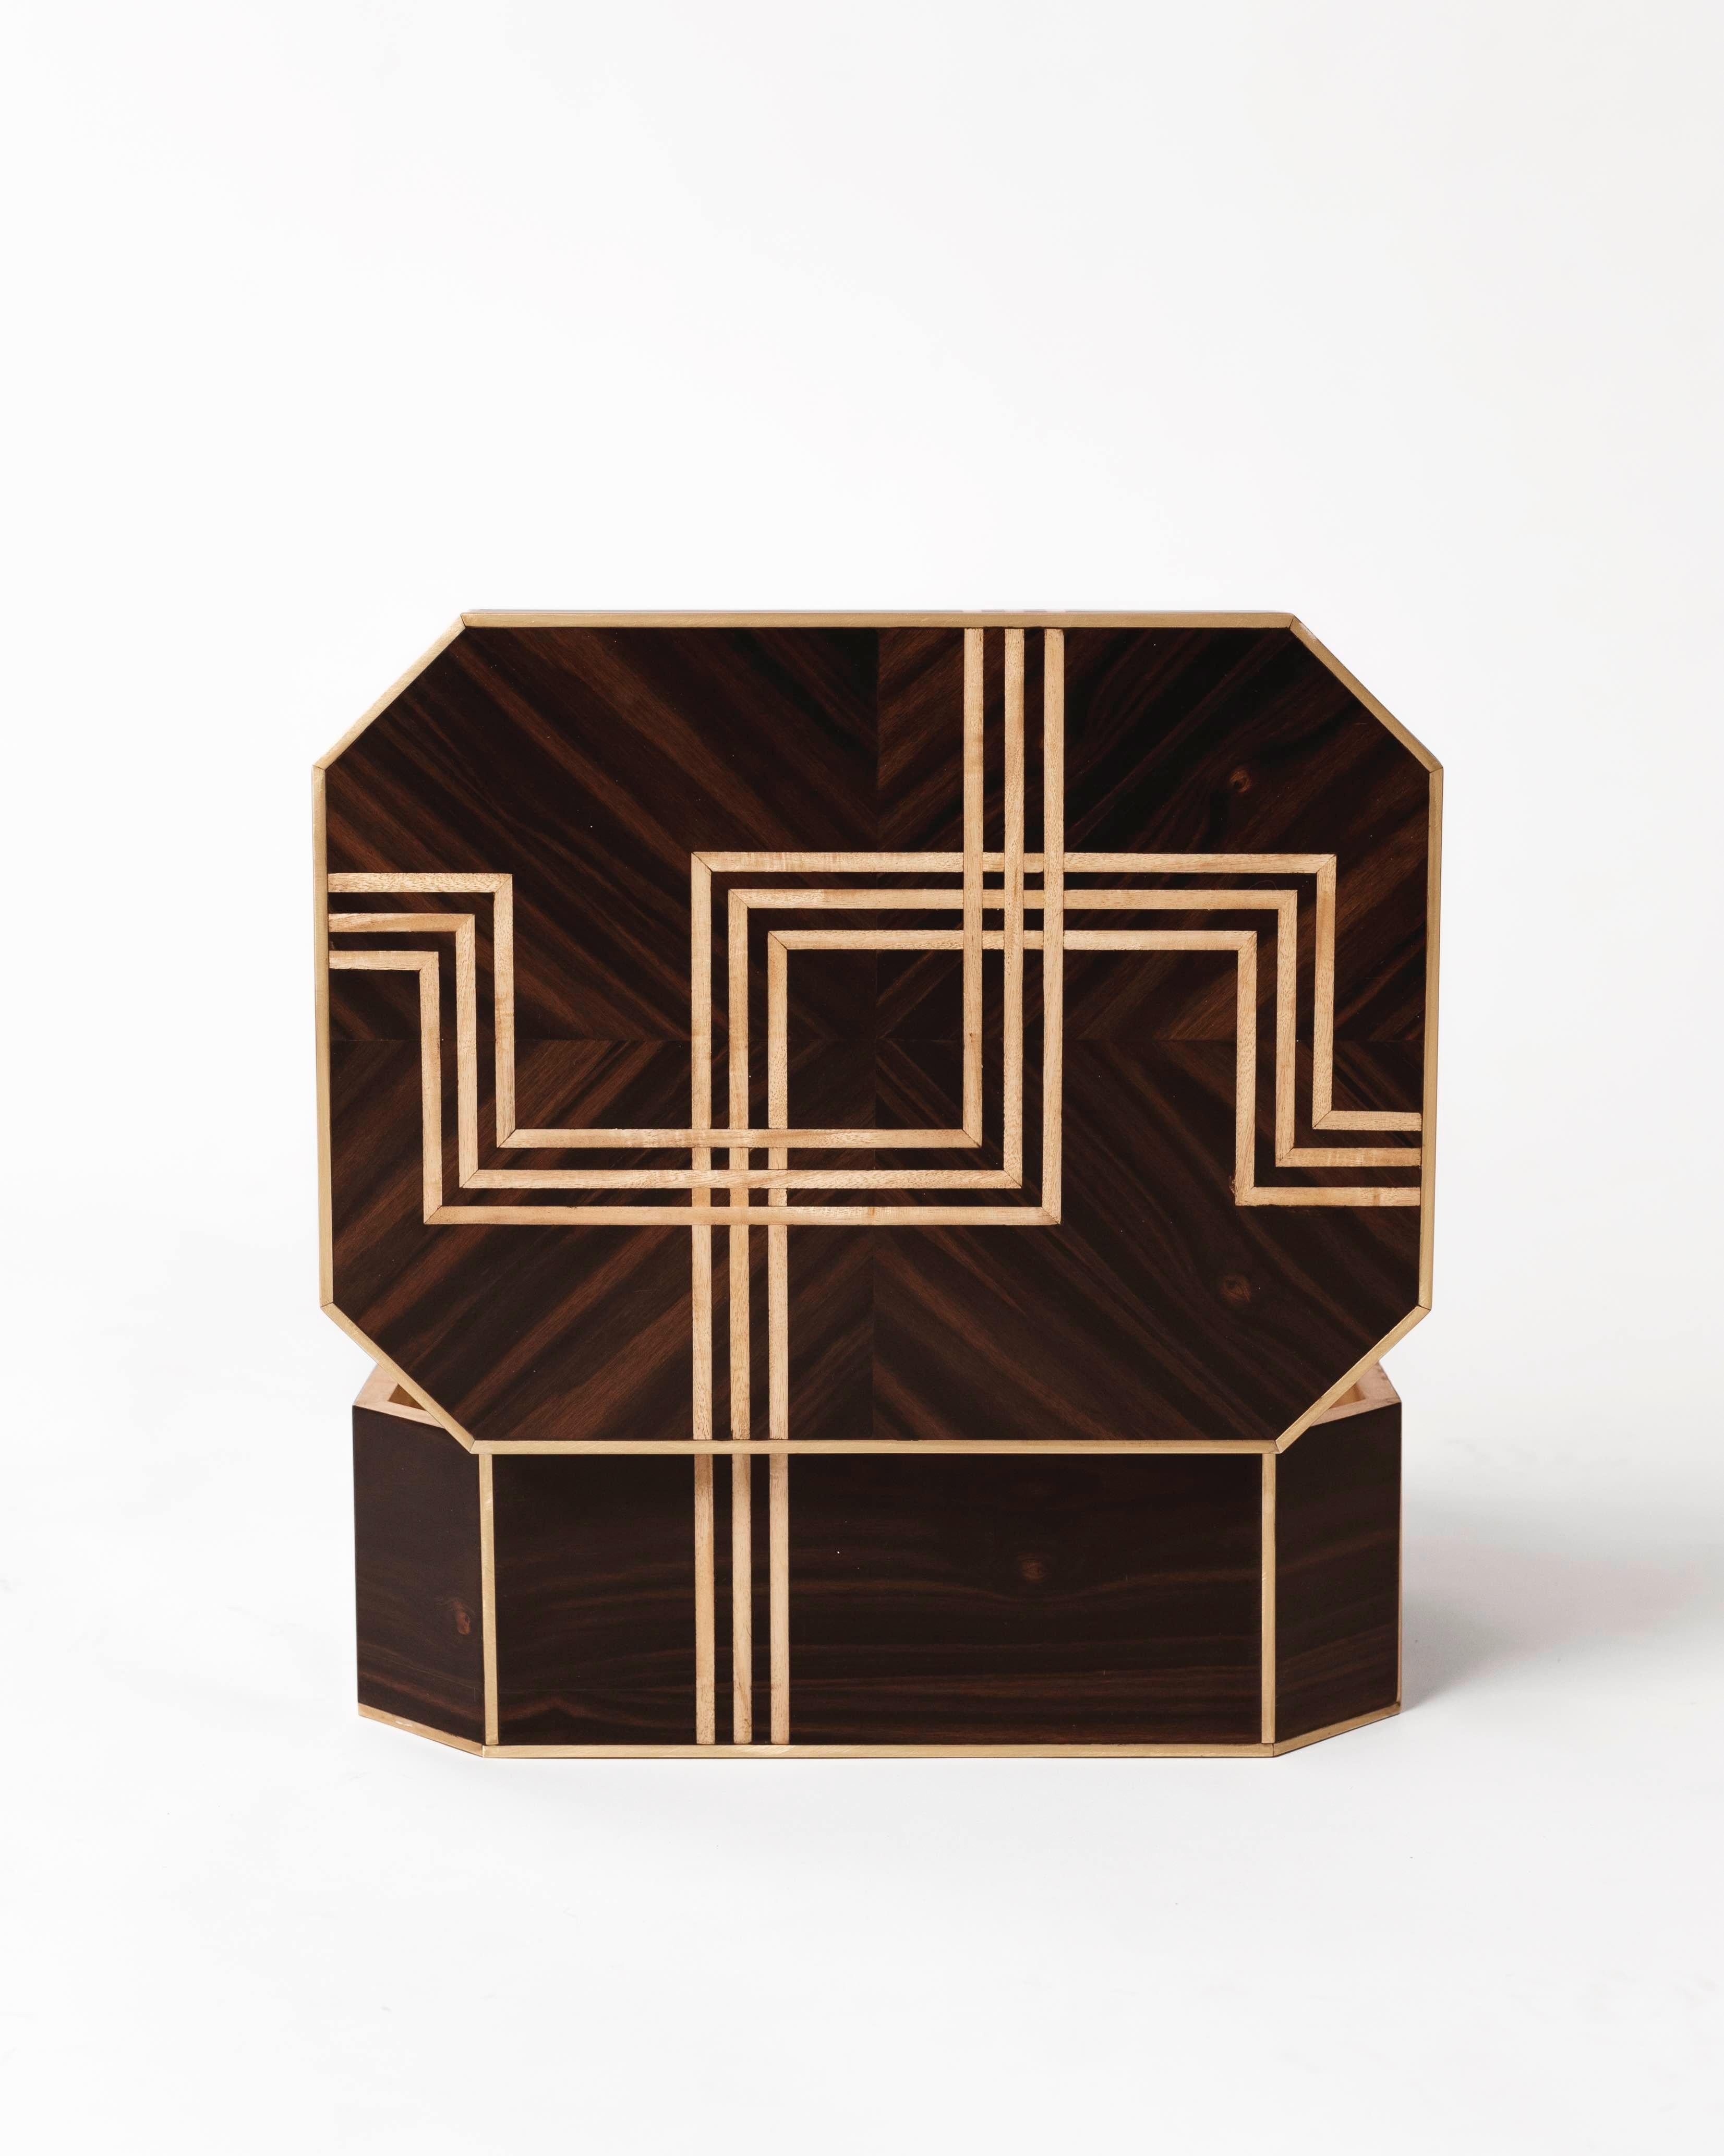 Large box built in spring wood with ebony veneer and geometric inlays in bronze and spring wood.

The influence for this piece came from Marion Dorn's design of the black and cream geometric patterned rug in the lounge of The Claridge's Hotel in